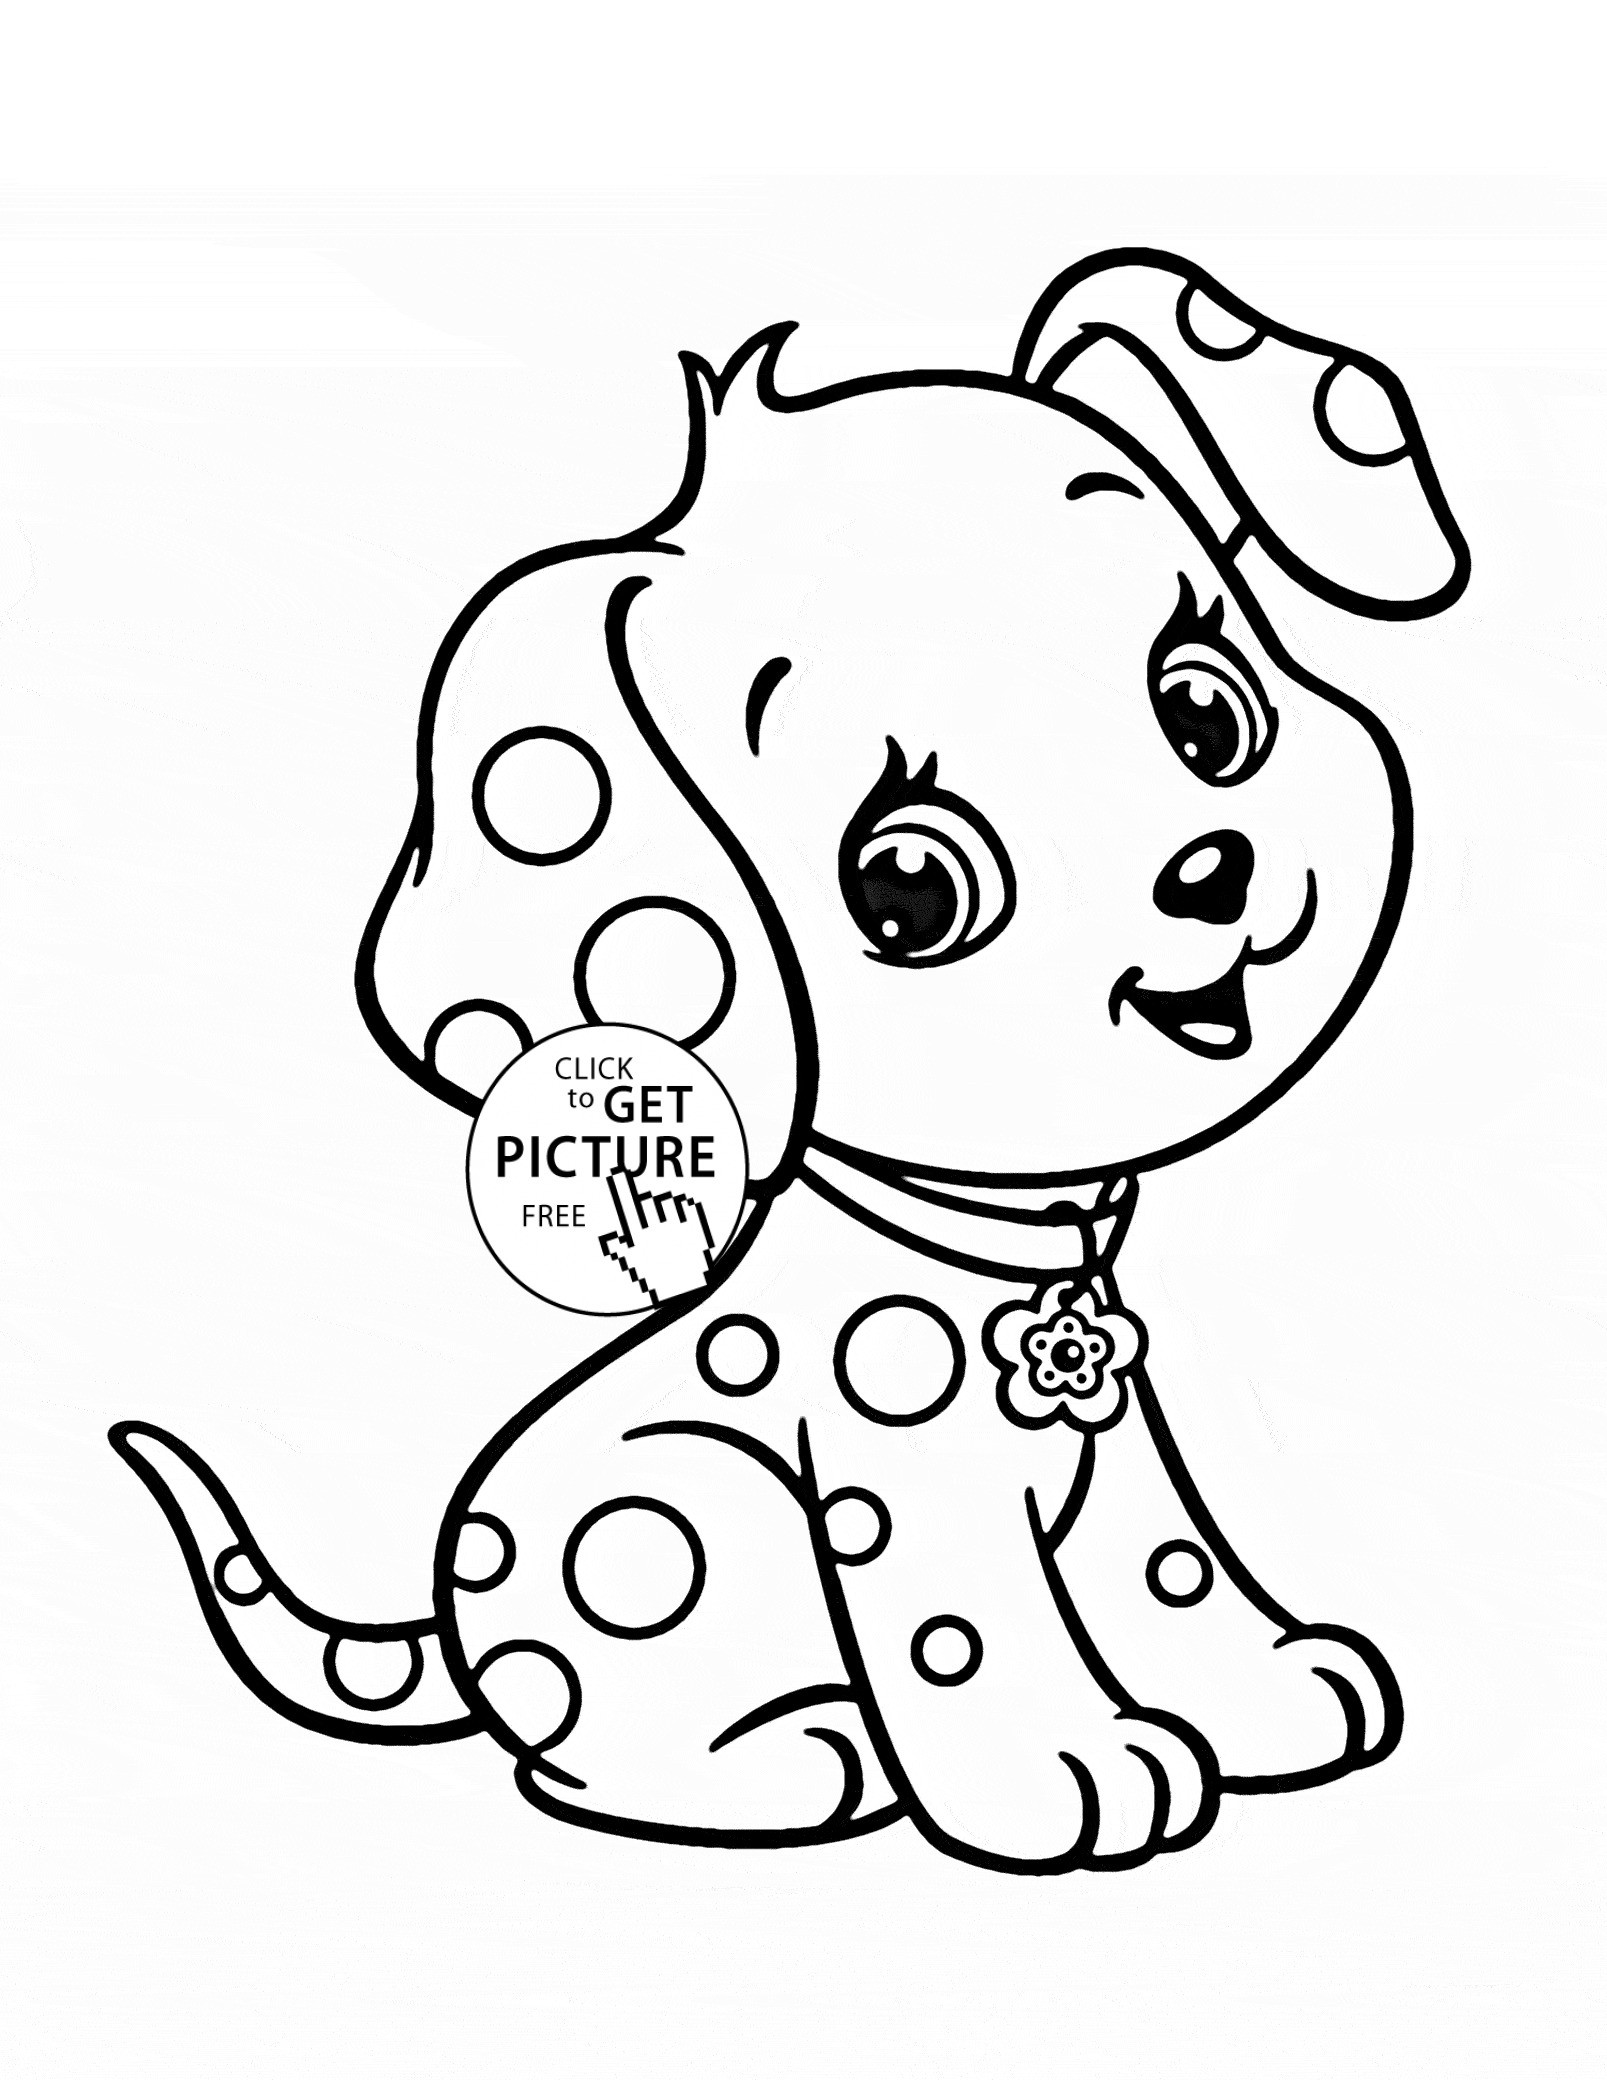 Coloring Sheets that You Can Print Fresh Cartoon Puppy Coloring Page for Kids Animal Coloring Pages